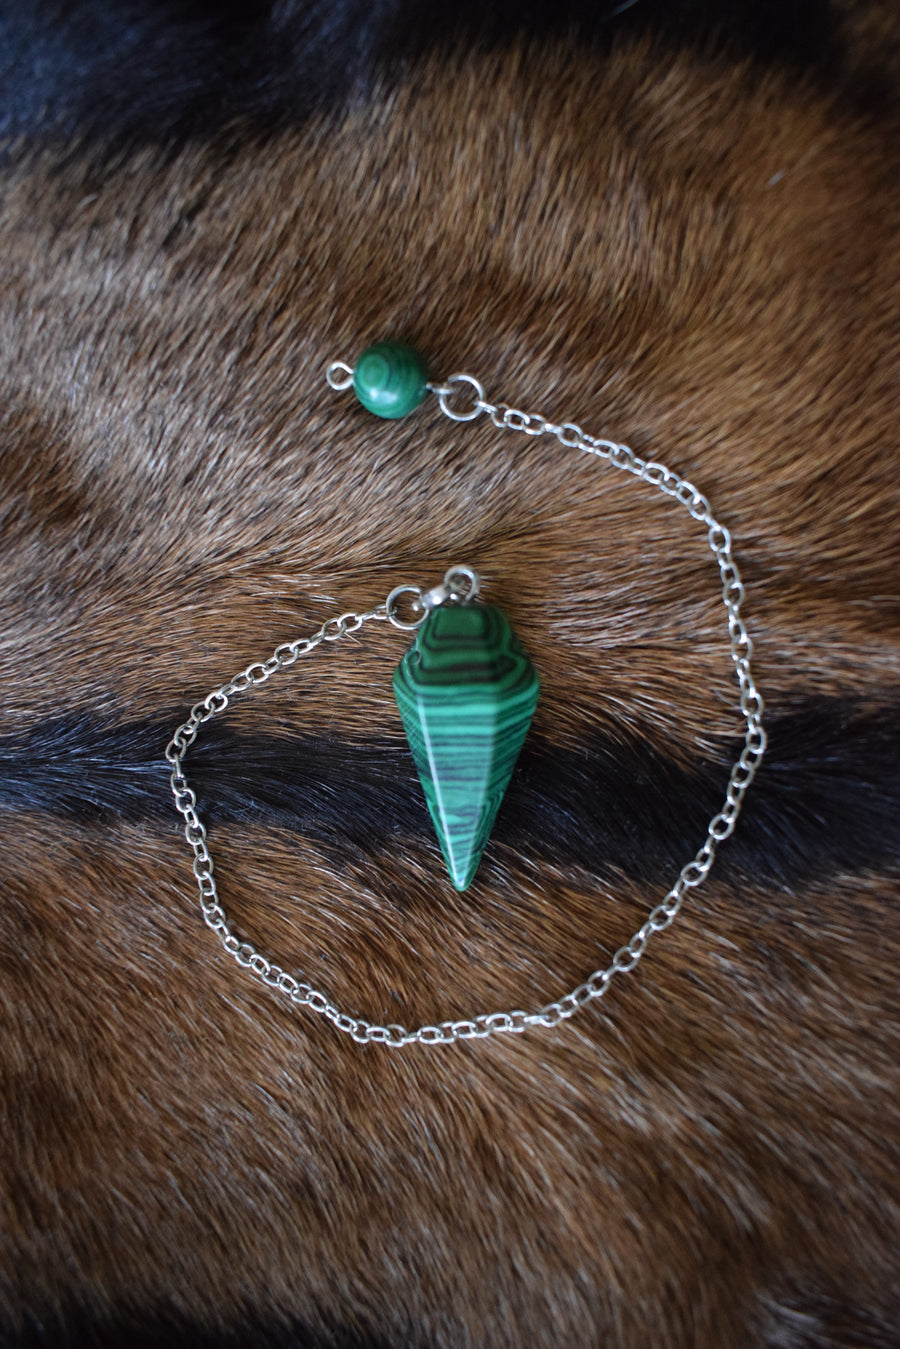 Small malachite point crystal pendulum with chain and bead sitting on goat skin fur